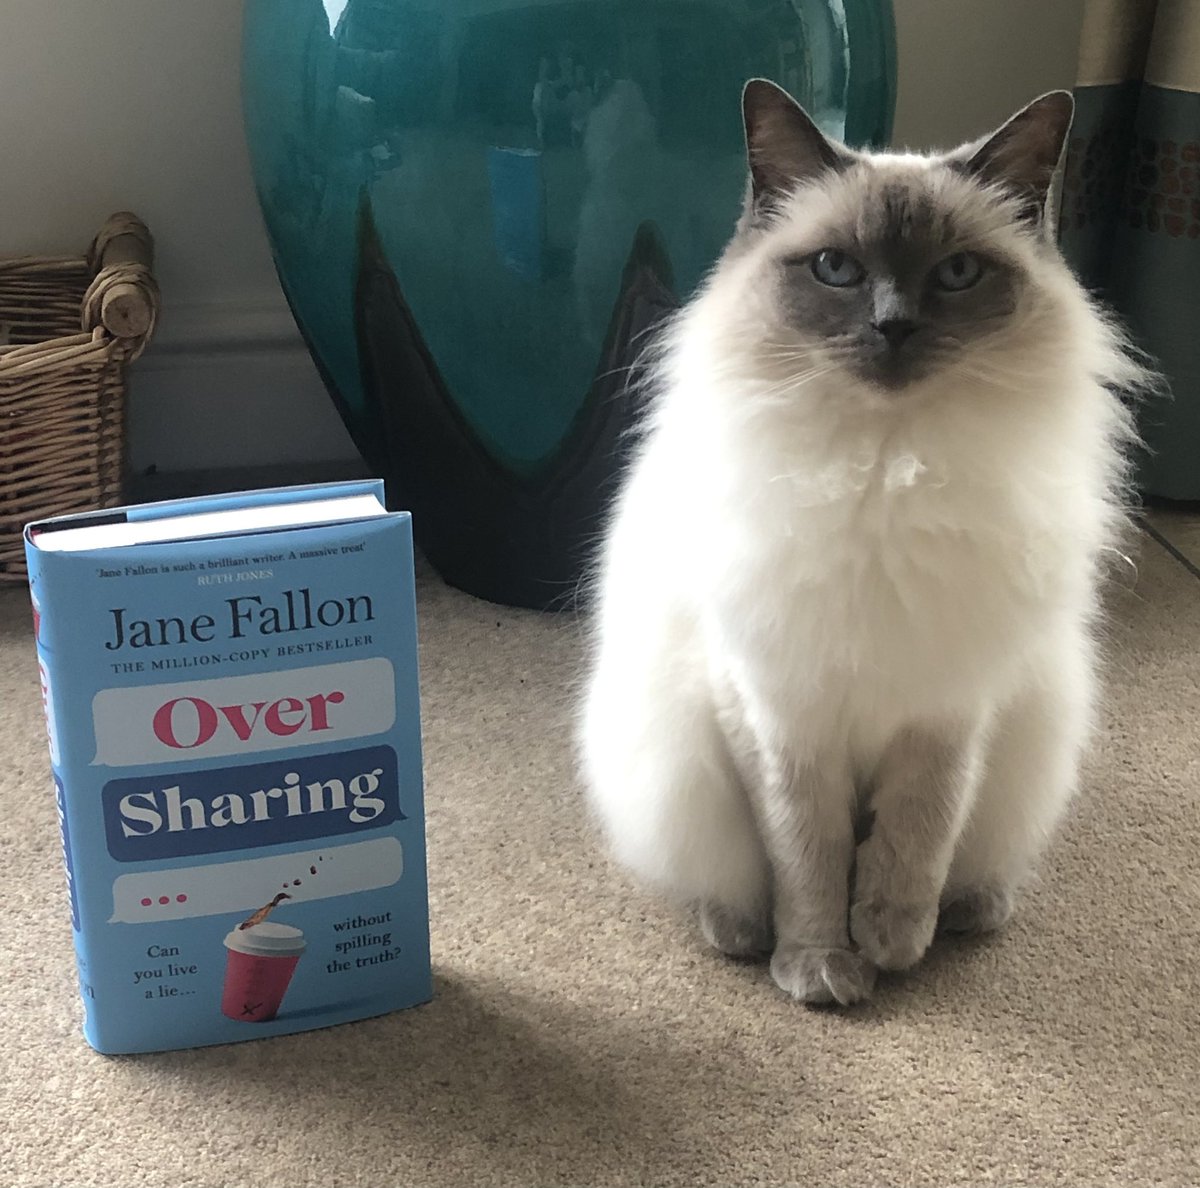 Well, @JaneFallon, Molly has graciously taken time away from her busy schedule to promote the arrival of your shiny new book. She is looking forward to the lap time that will become available while I am reading it! #PromoPets #OverSharing